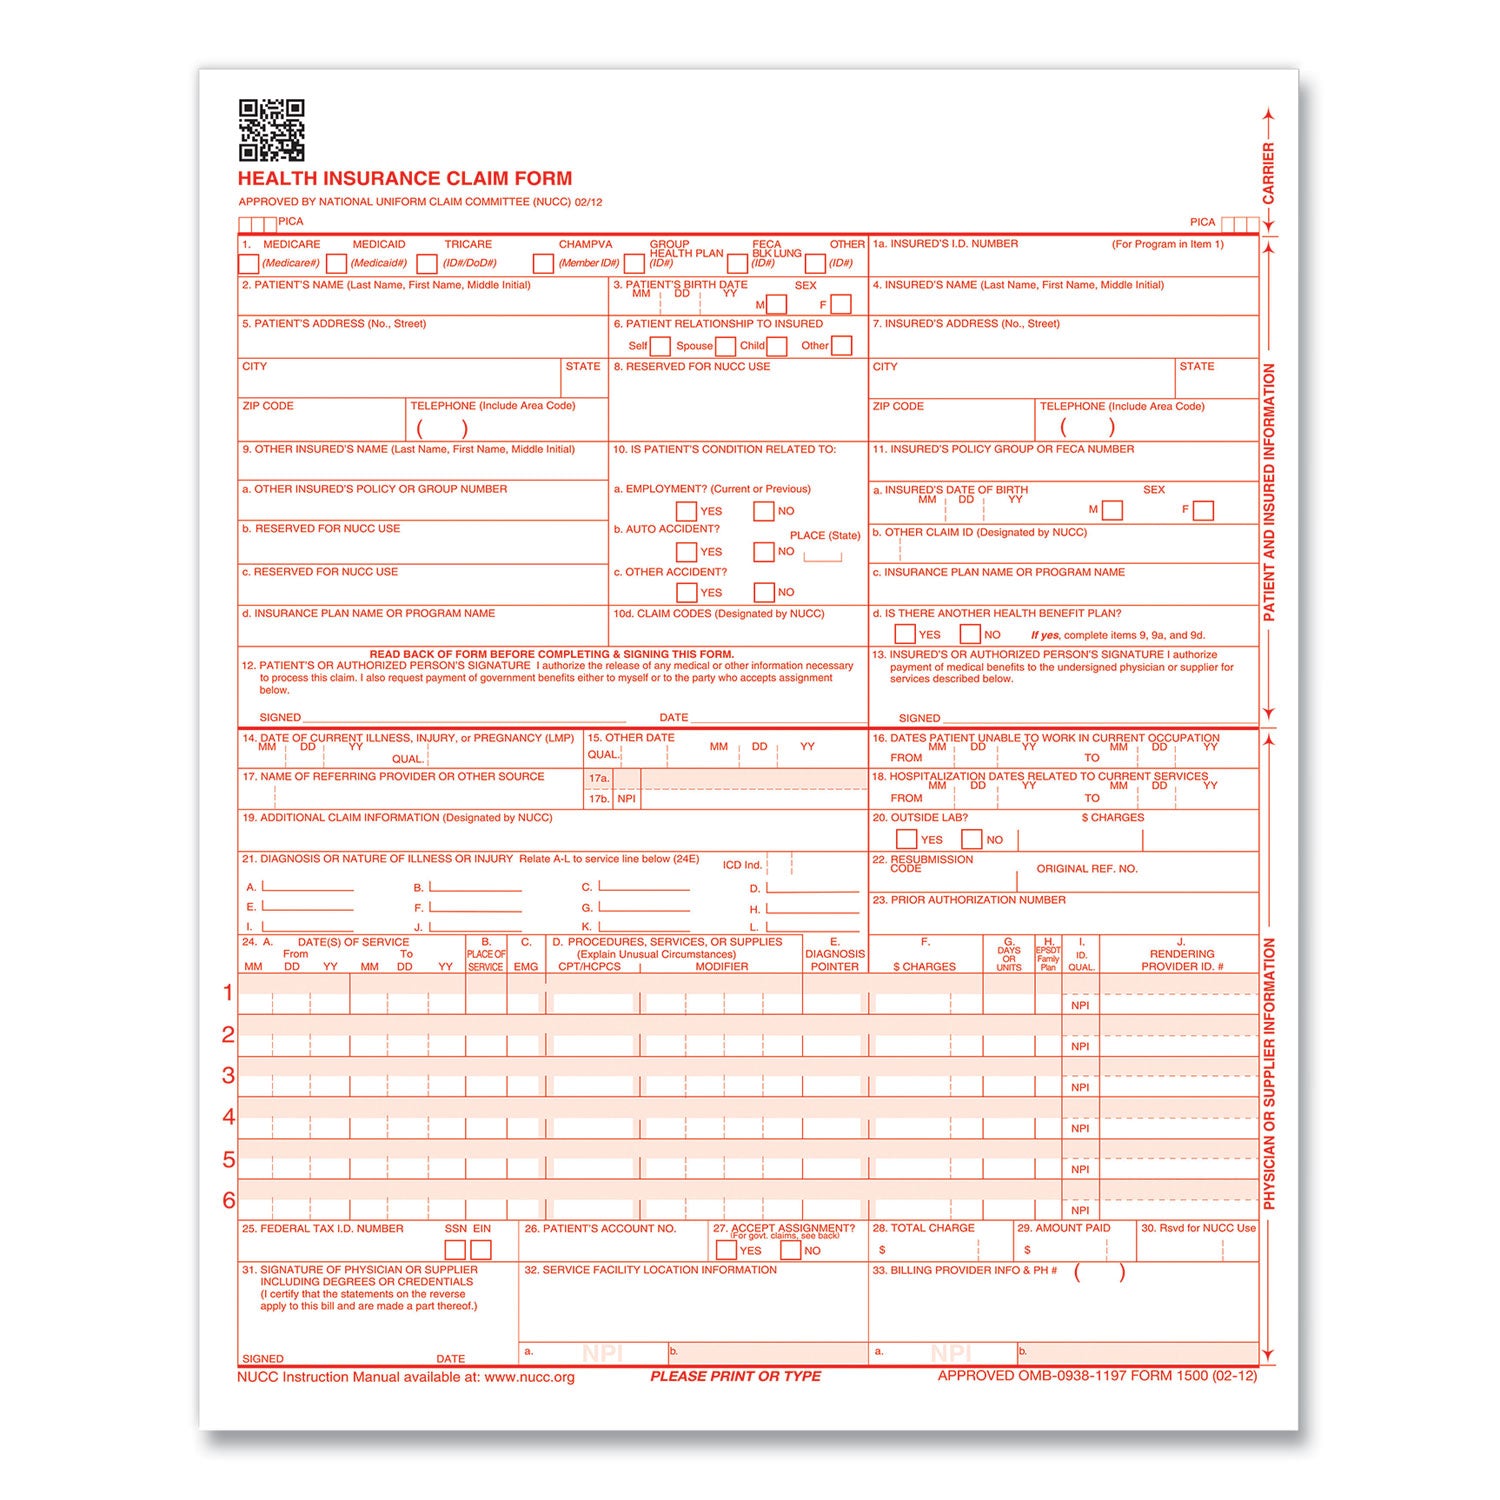 cms-1500-health-insurance-claim-form-one-part-no-copies-85-x-11-1000-forms-total_tfpcms12lc1 - 1